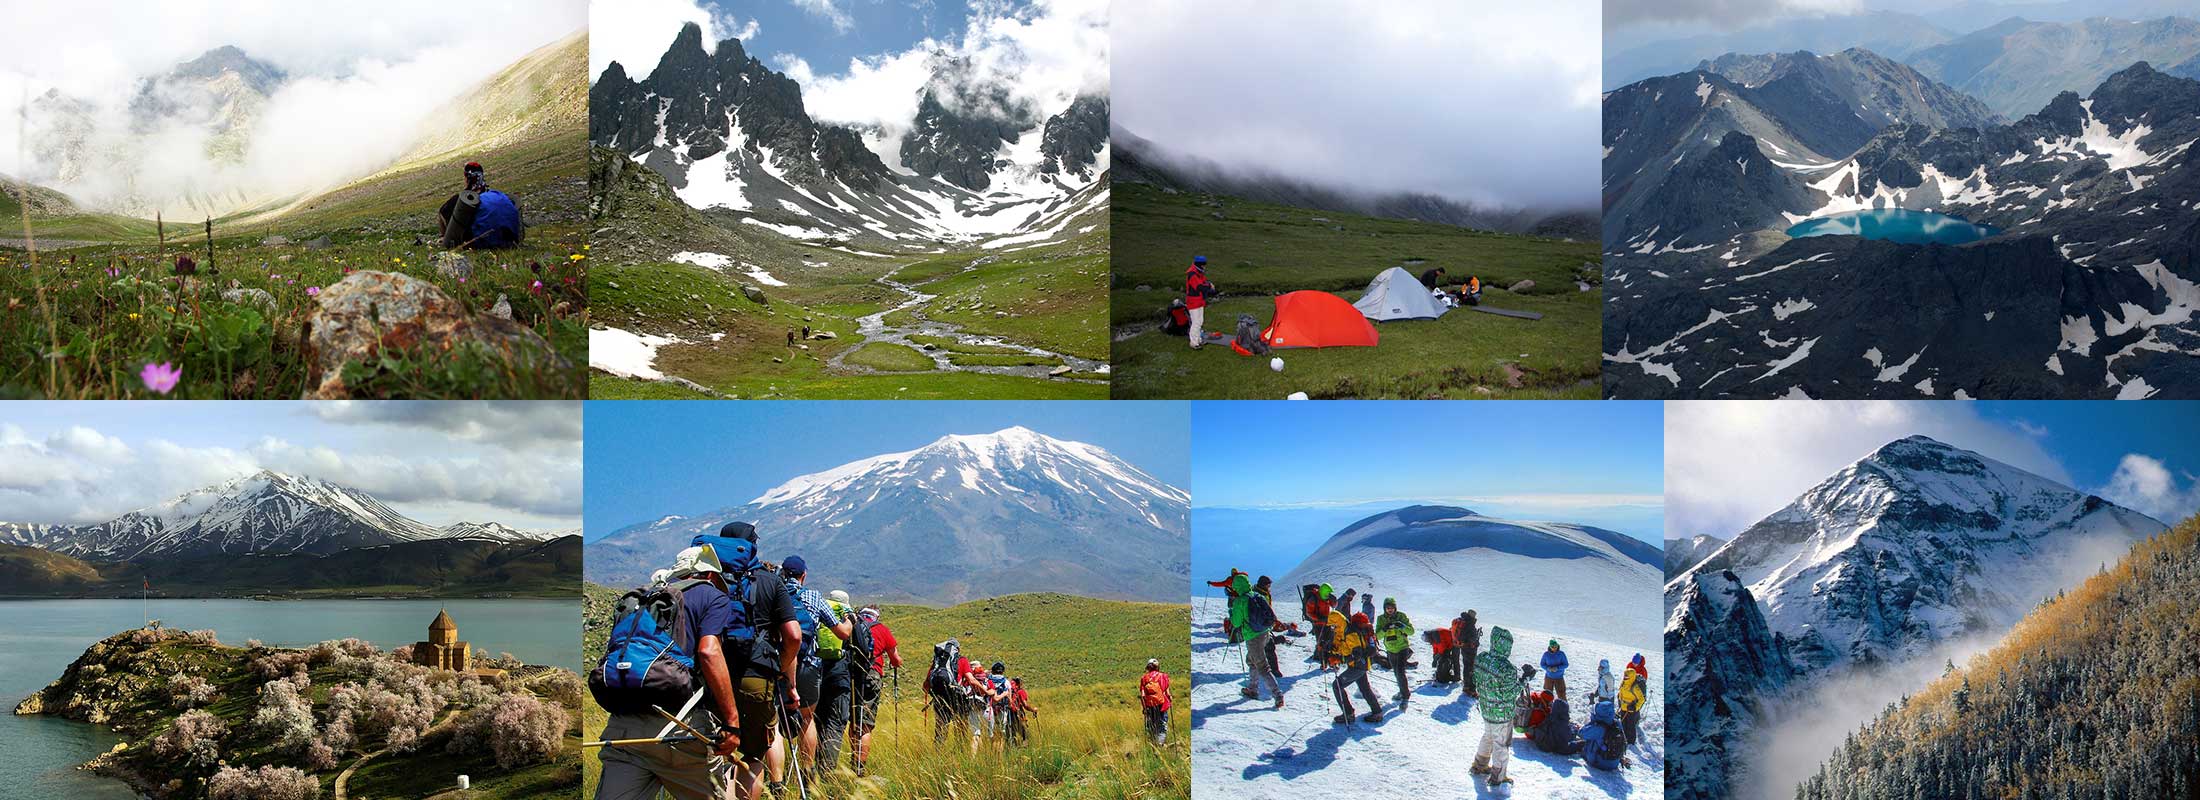 Mountainering in Turkey | Adventure Tours | Outdoor Tours